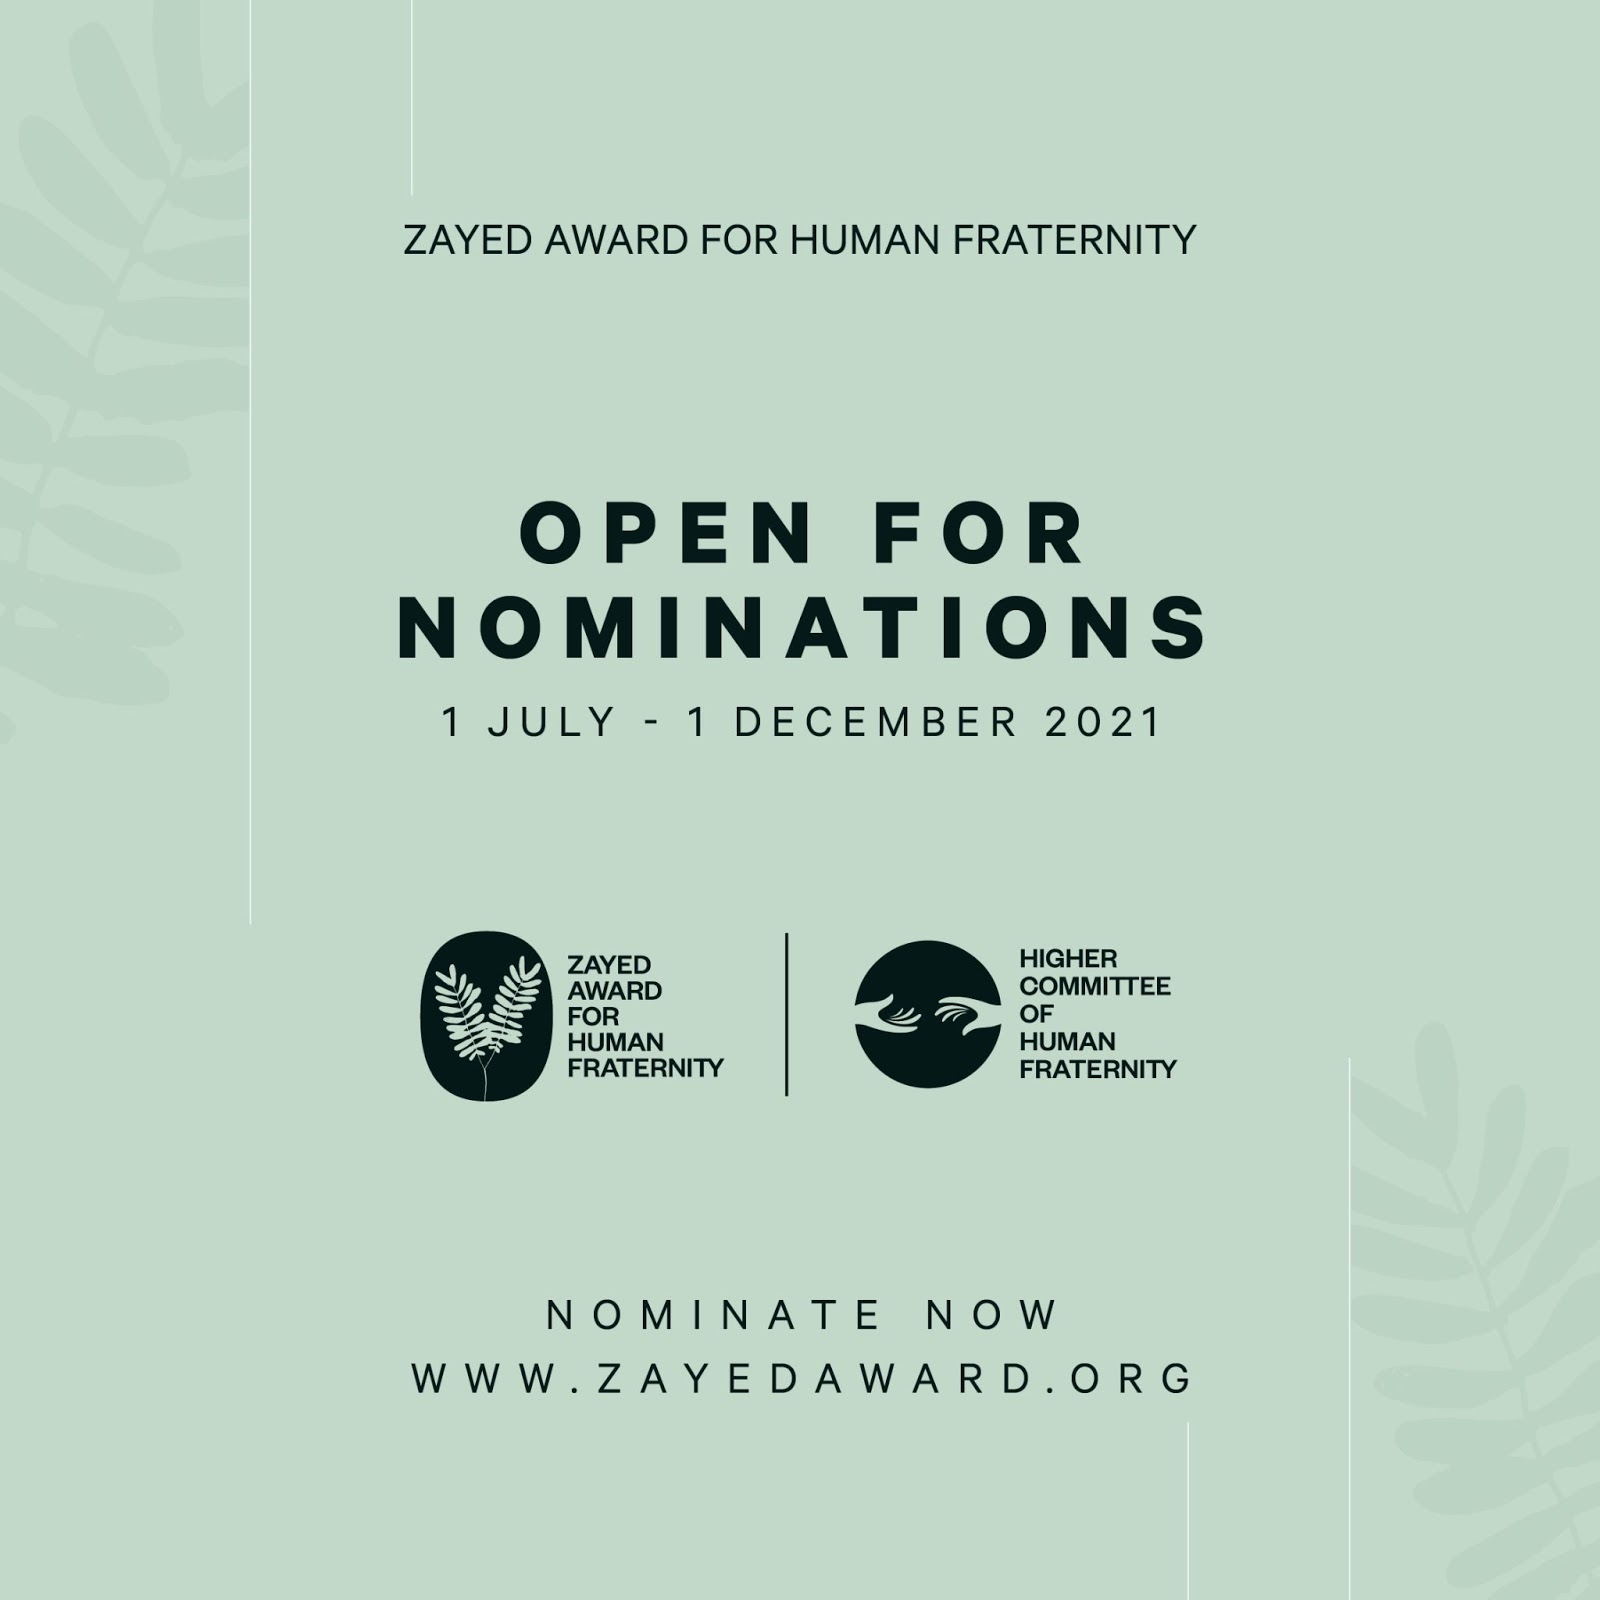 Nominations Open For 2022 Zayed Award For Human Fraternity